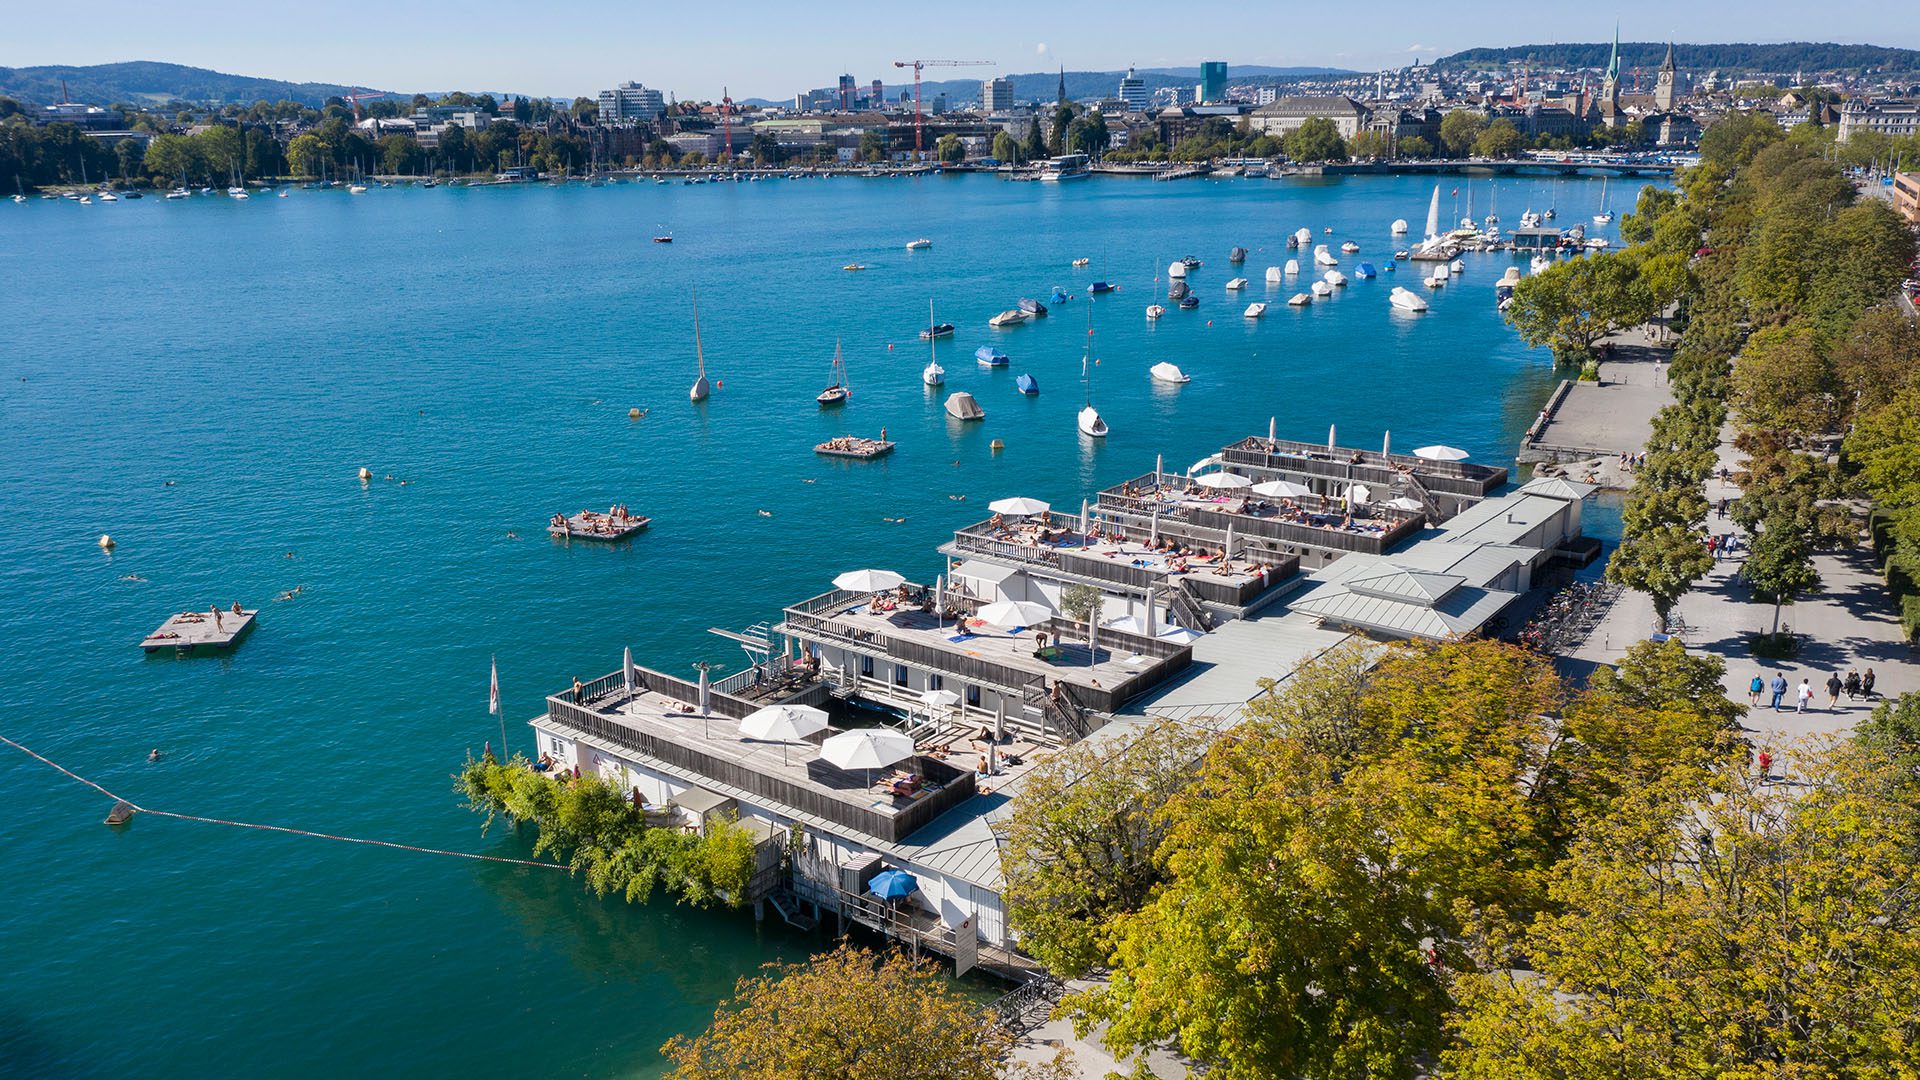 City Escape To Zurich: 5 Outdoor Adventures For The Quintessential Swiss Vacation